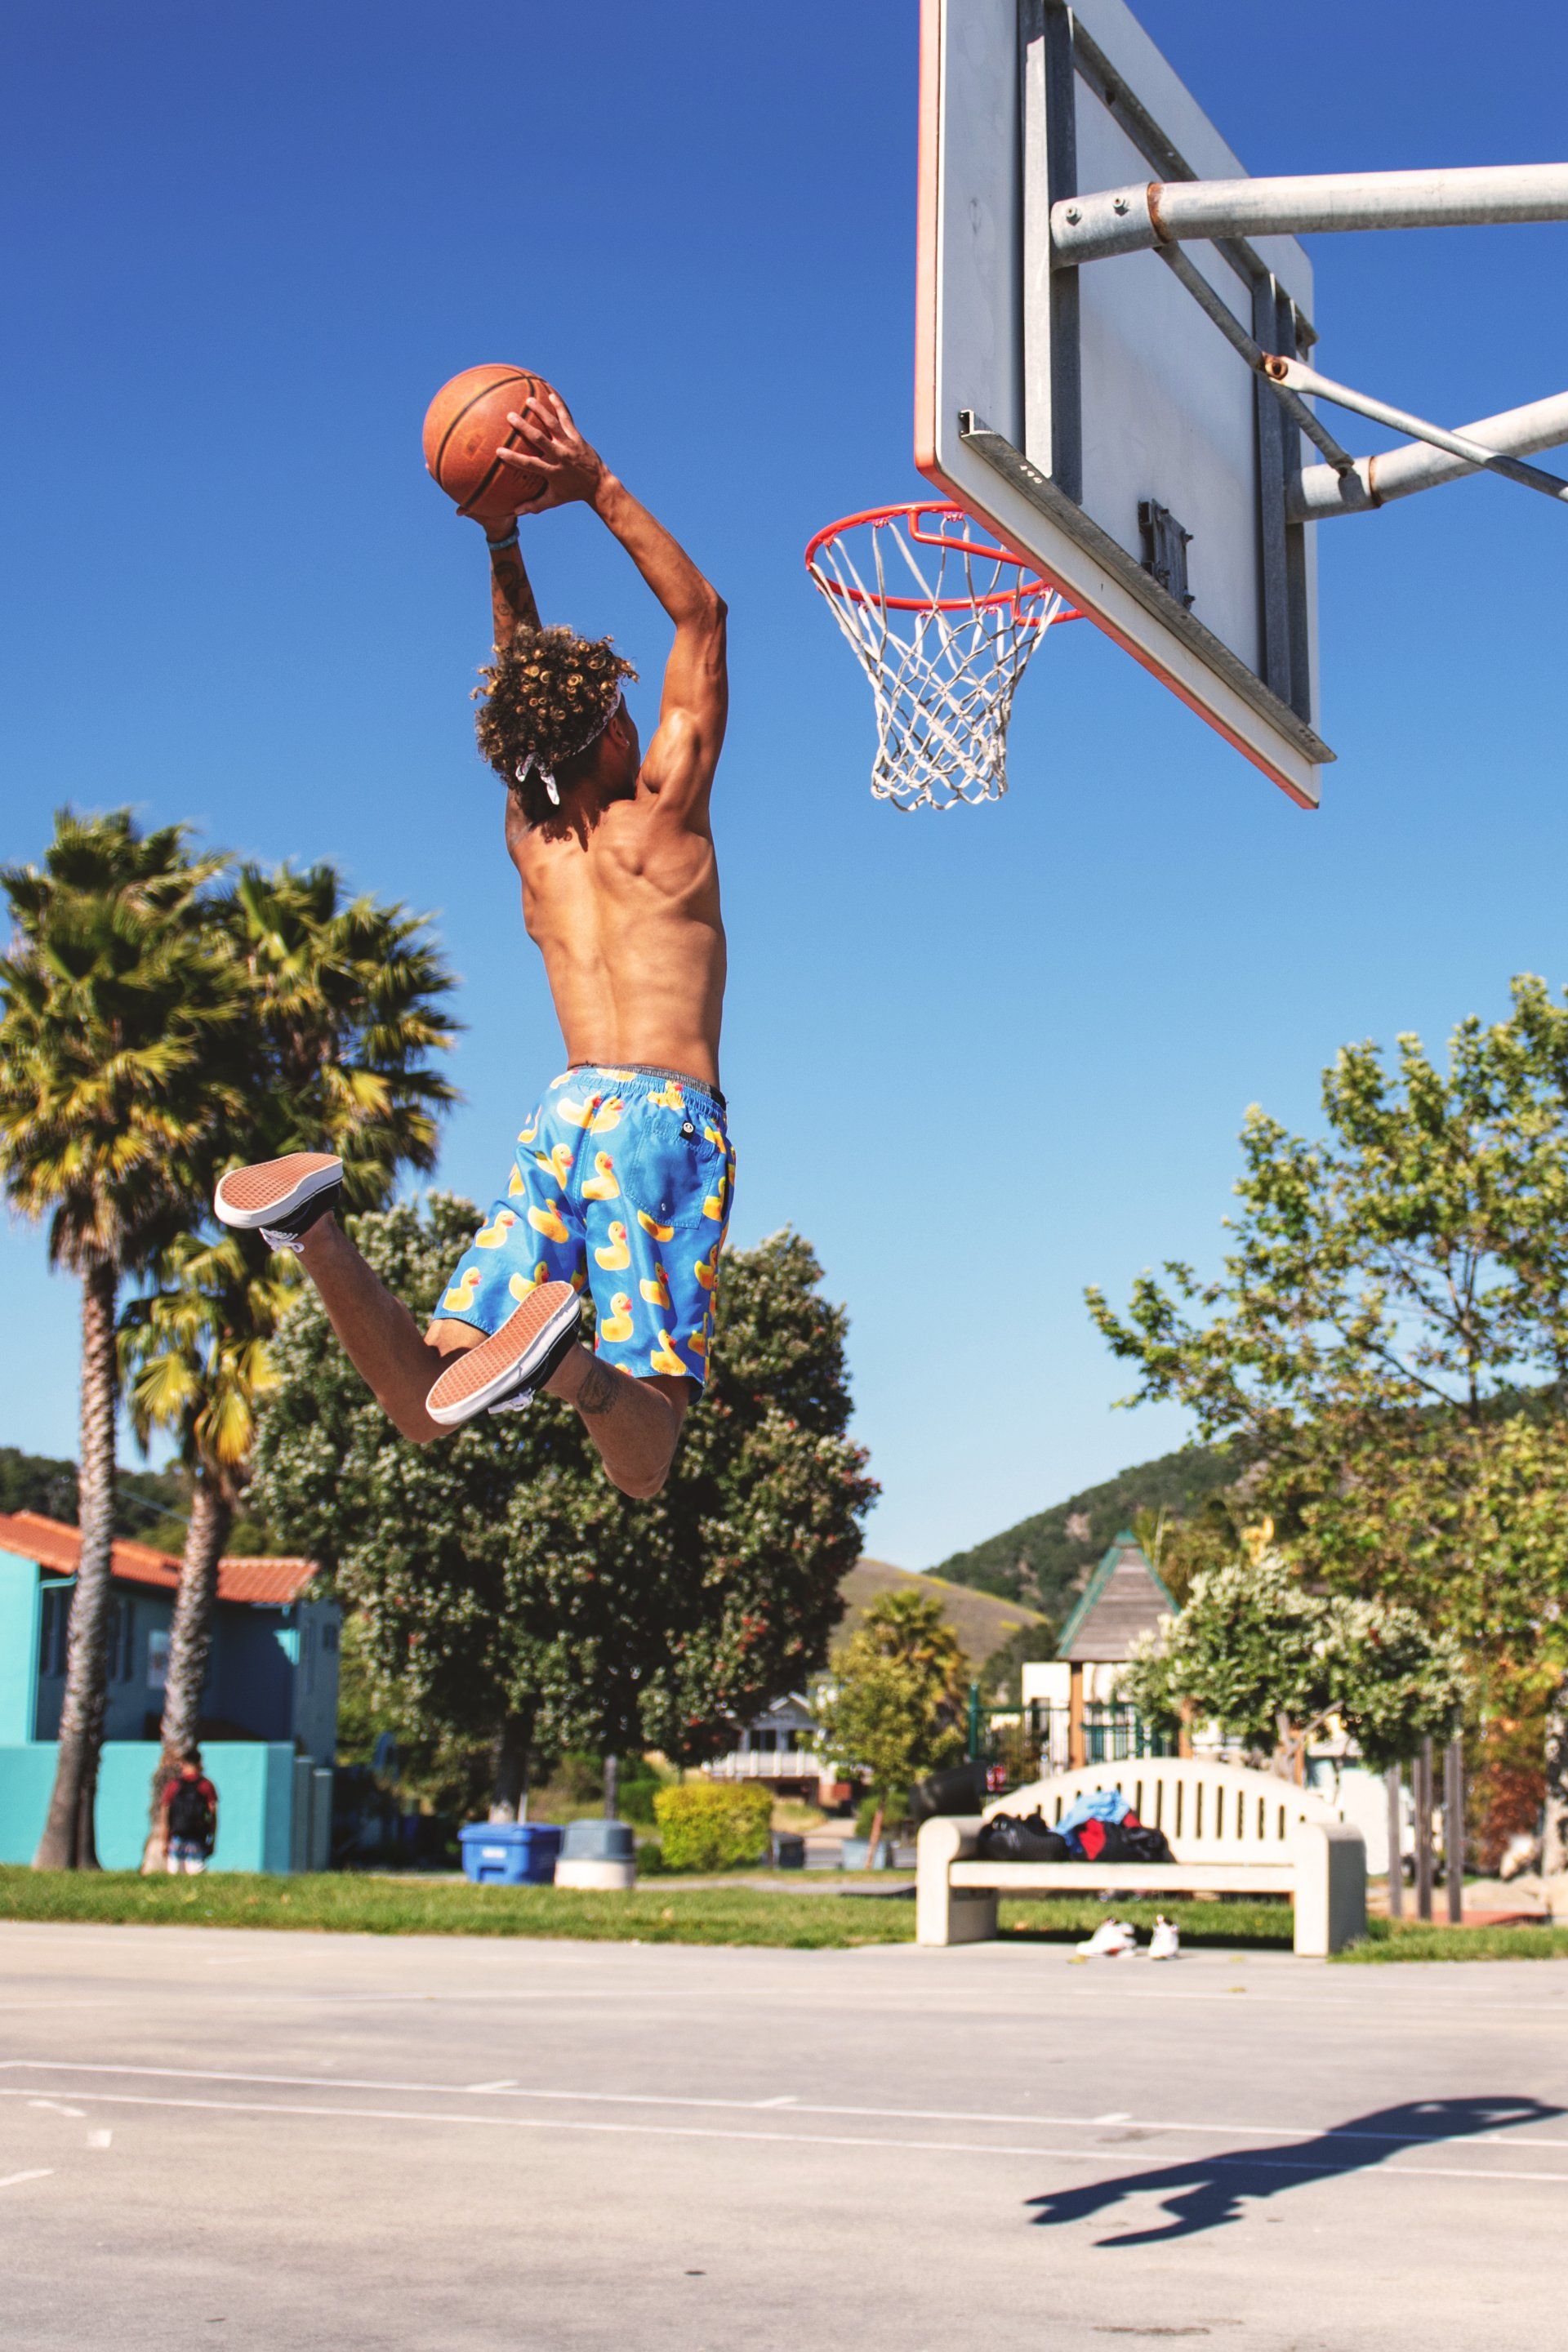 A man is jumping in the air to dunk a basketball into a hoop.